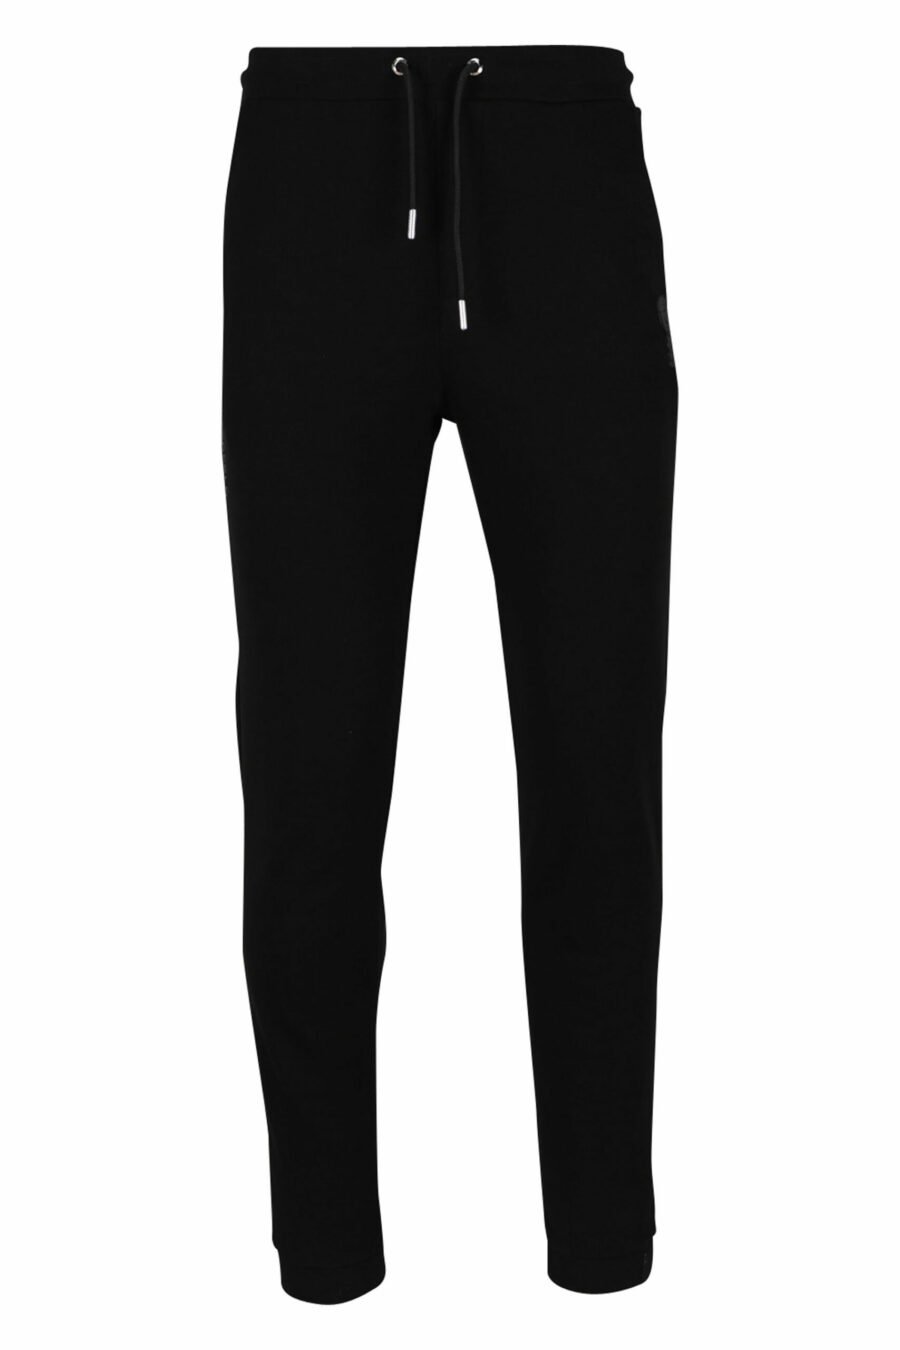 Tracksuit bottoms black with rubber mini-logo - 4062226393898 scaled